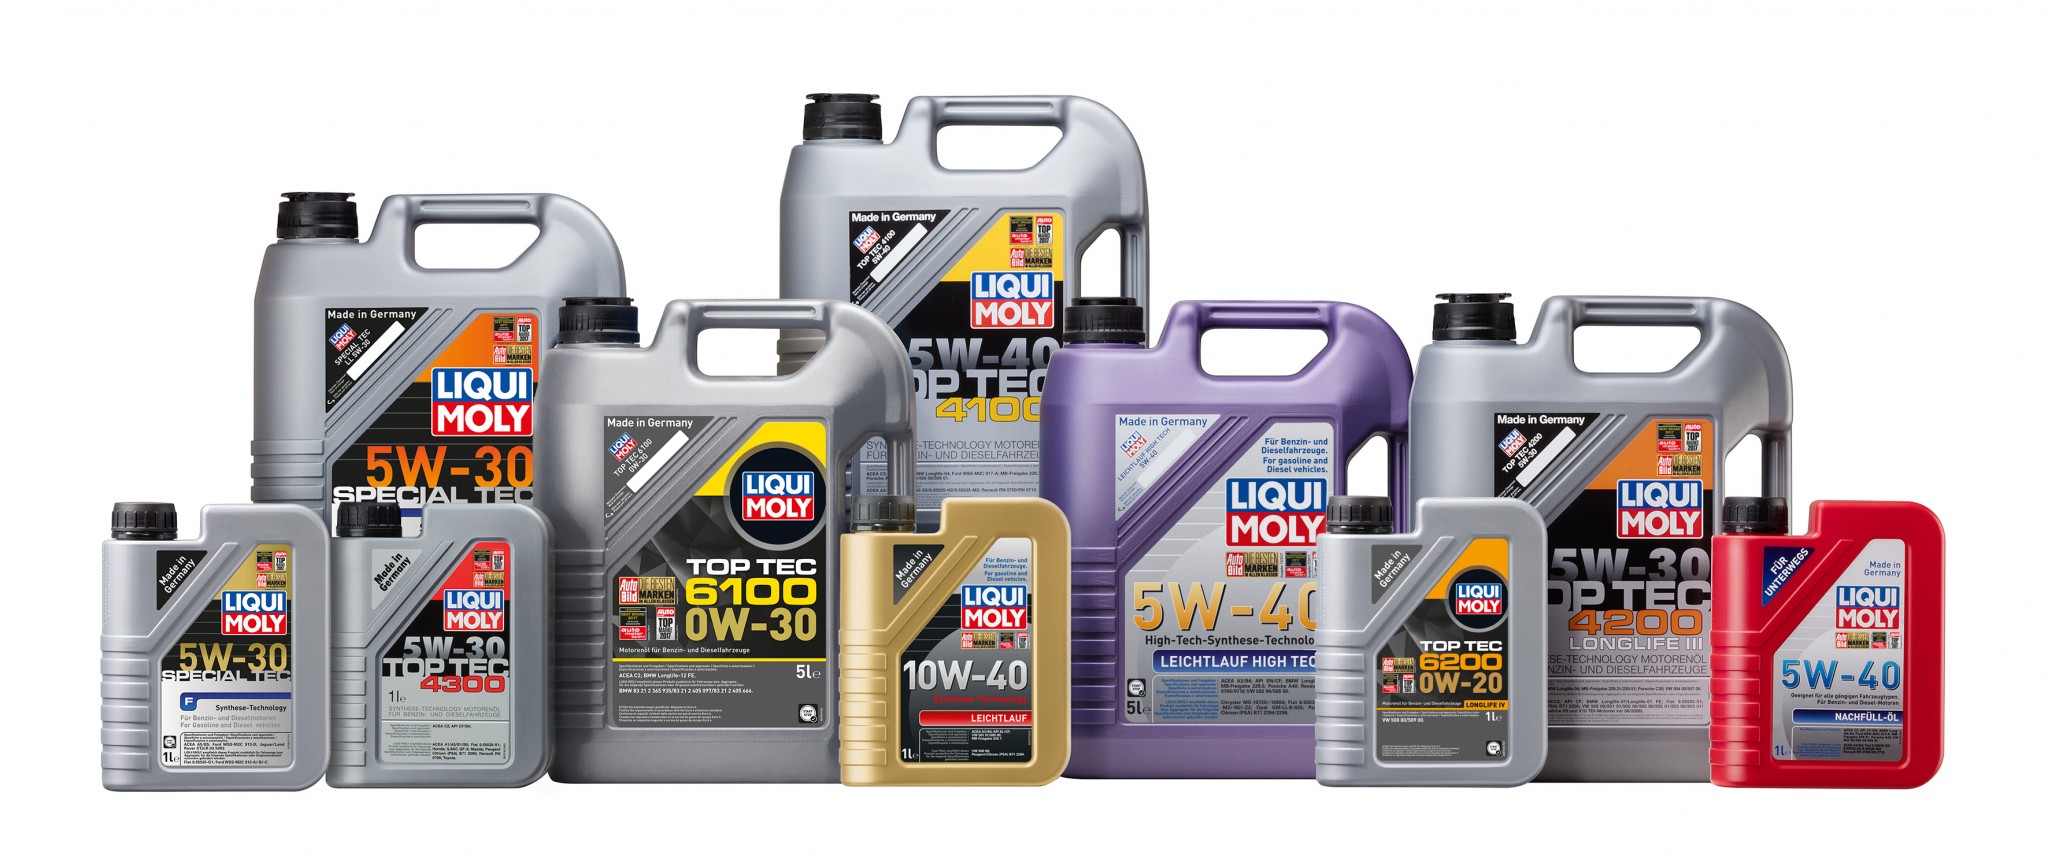 LIQUI MOLY - Problems with high fuel consumption